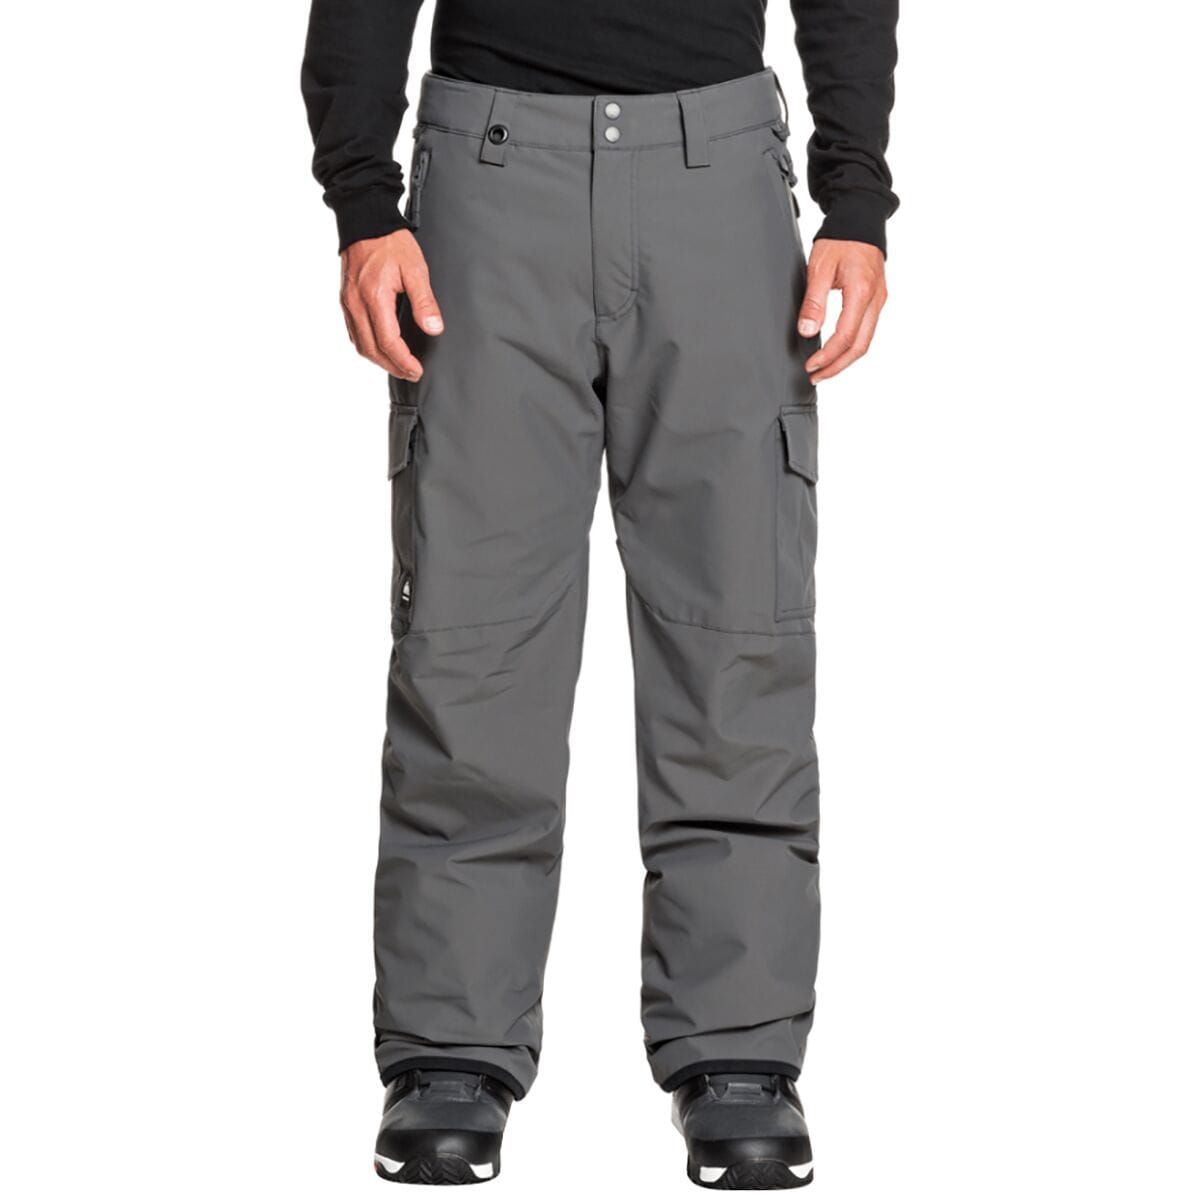 Quiksilver Porter Insulated Pant - Men's Iron Gate